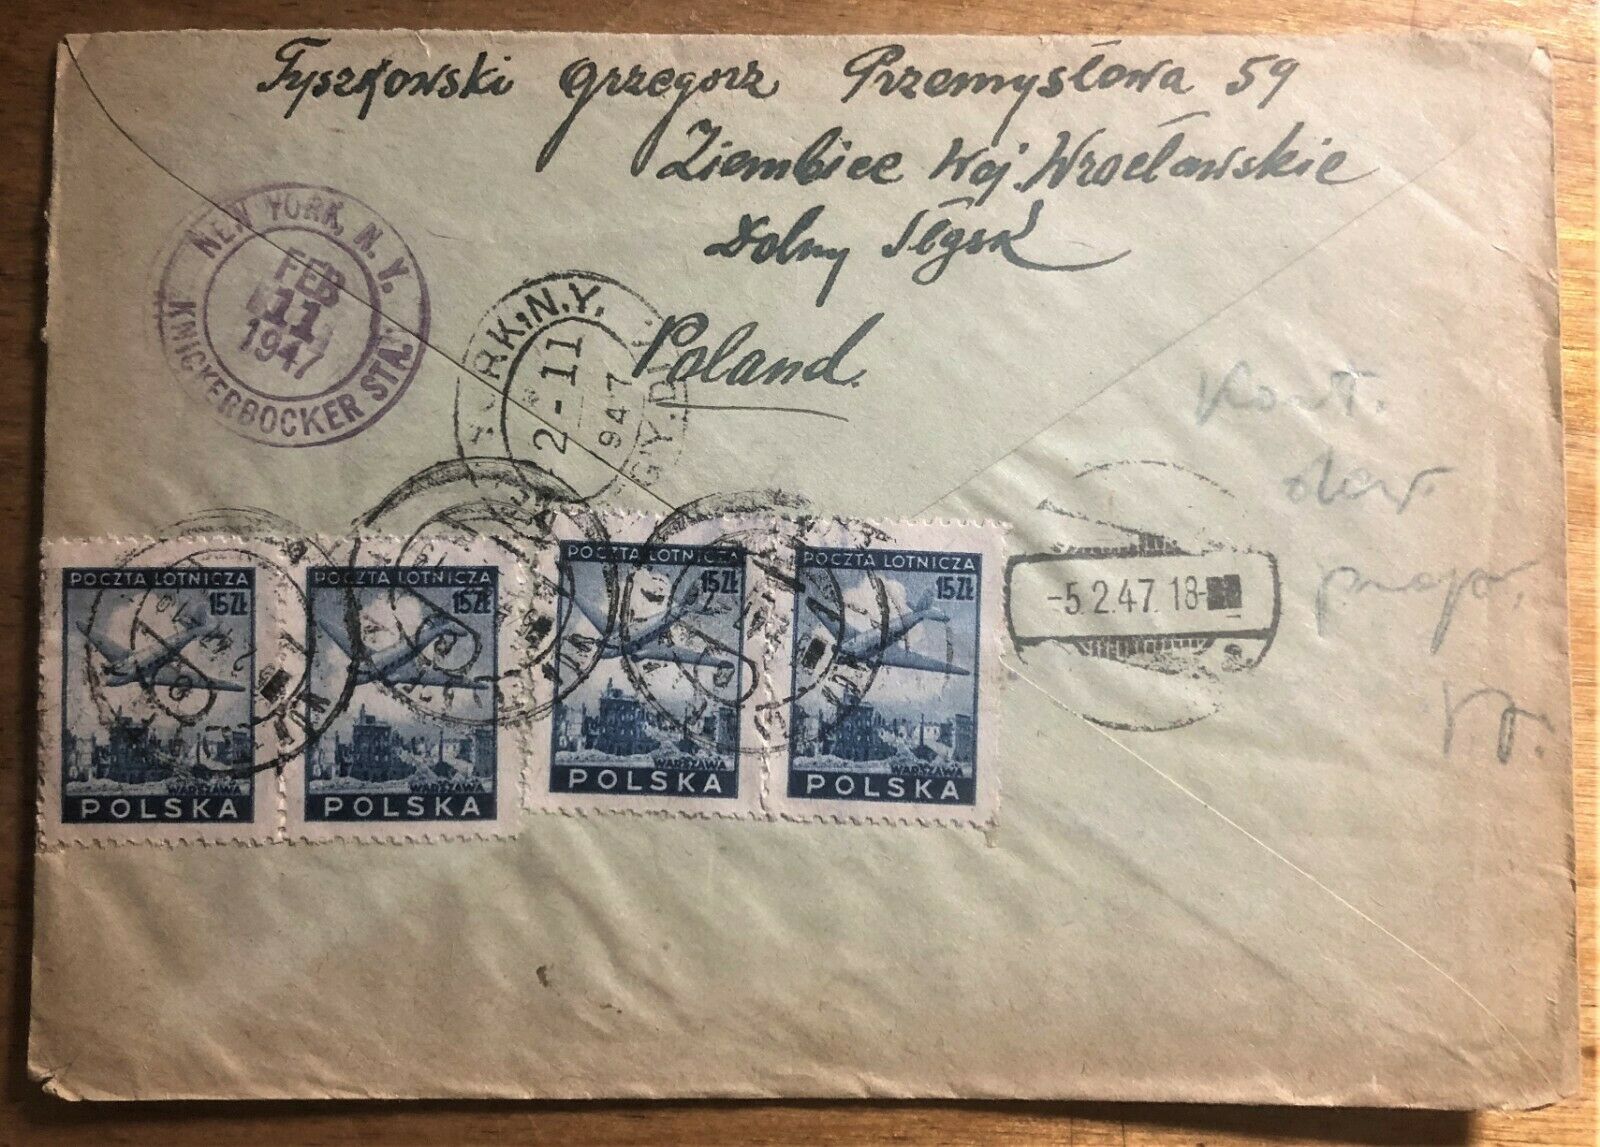 SILESIA SHTETL ZIEMBICE POLAND to JEWISH FORWARD in NYC REGISTERED COVER of 1947